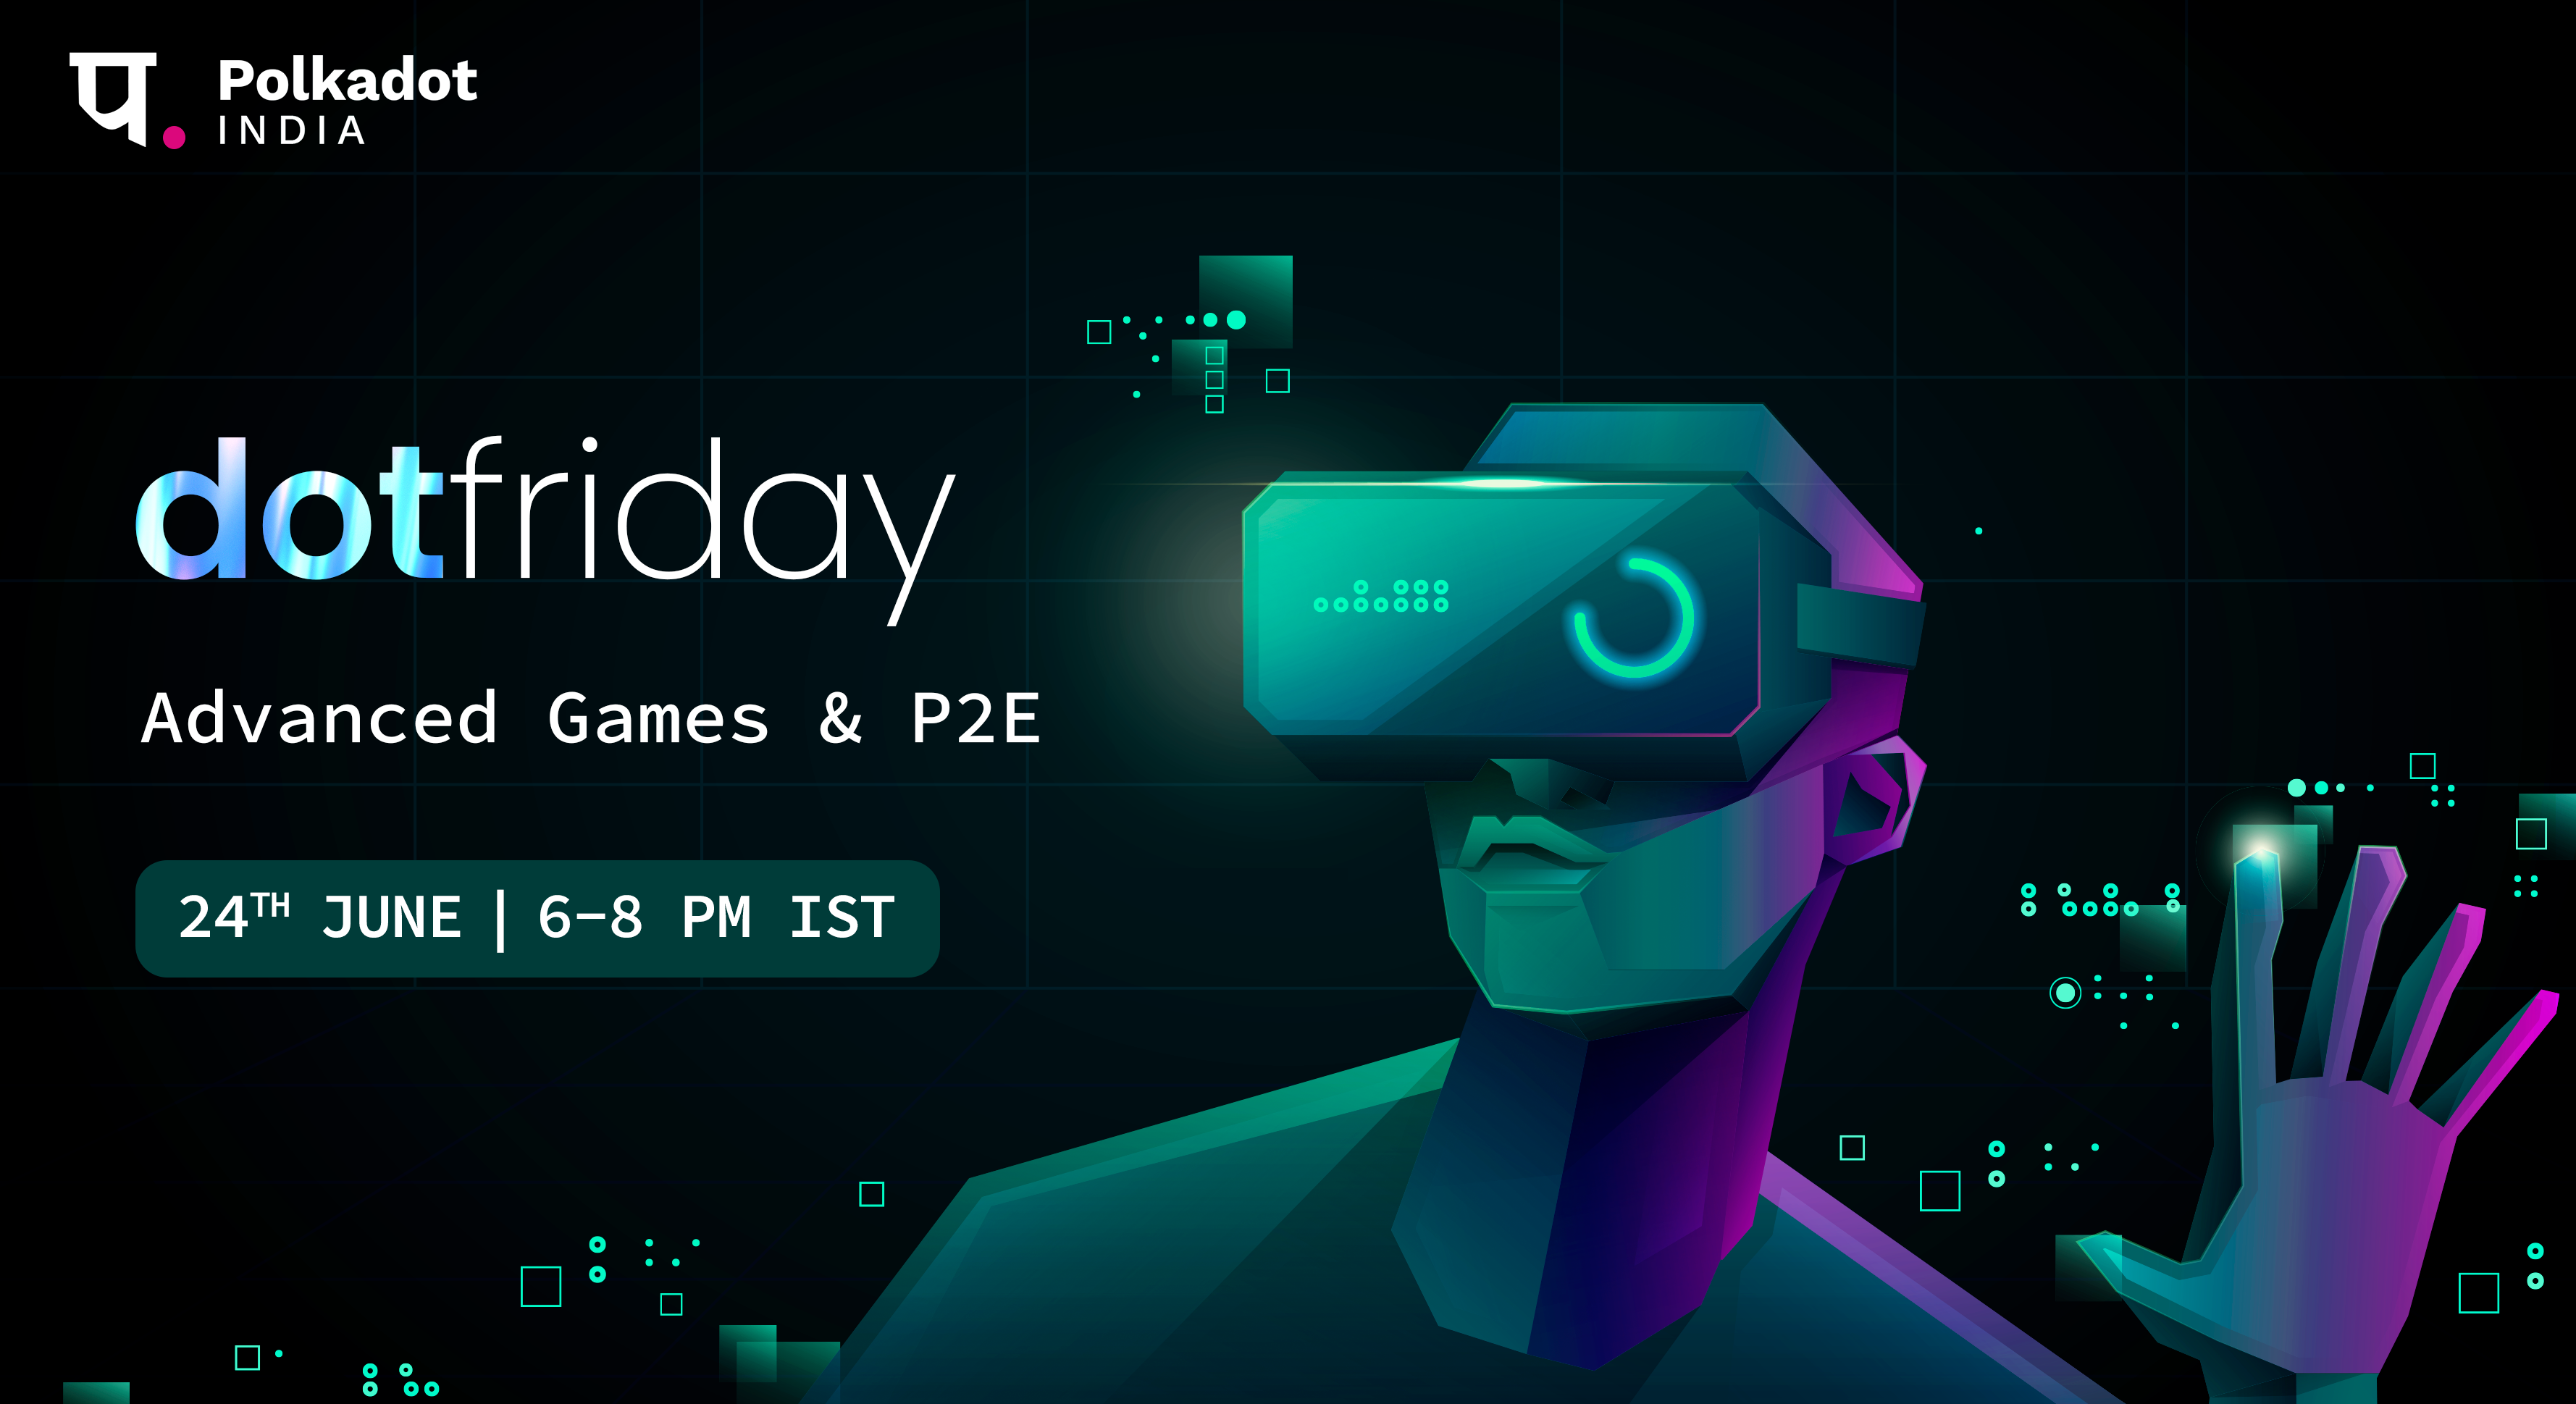 DotFriday by Polkadot India - Advanced Gaming, Online Event